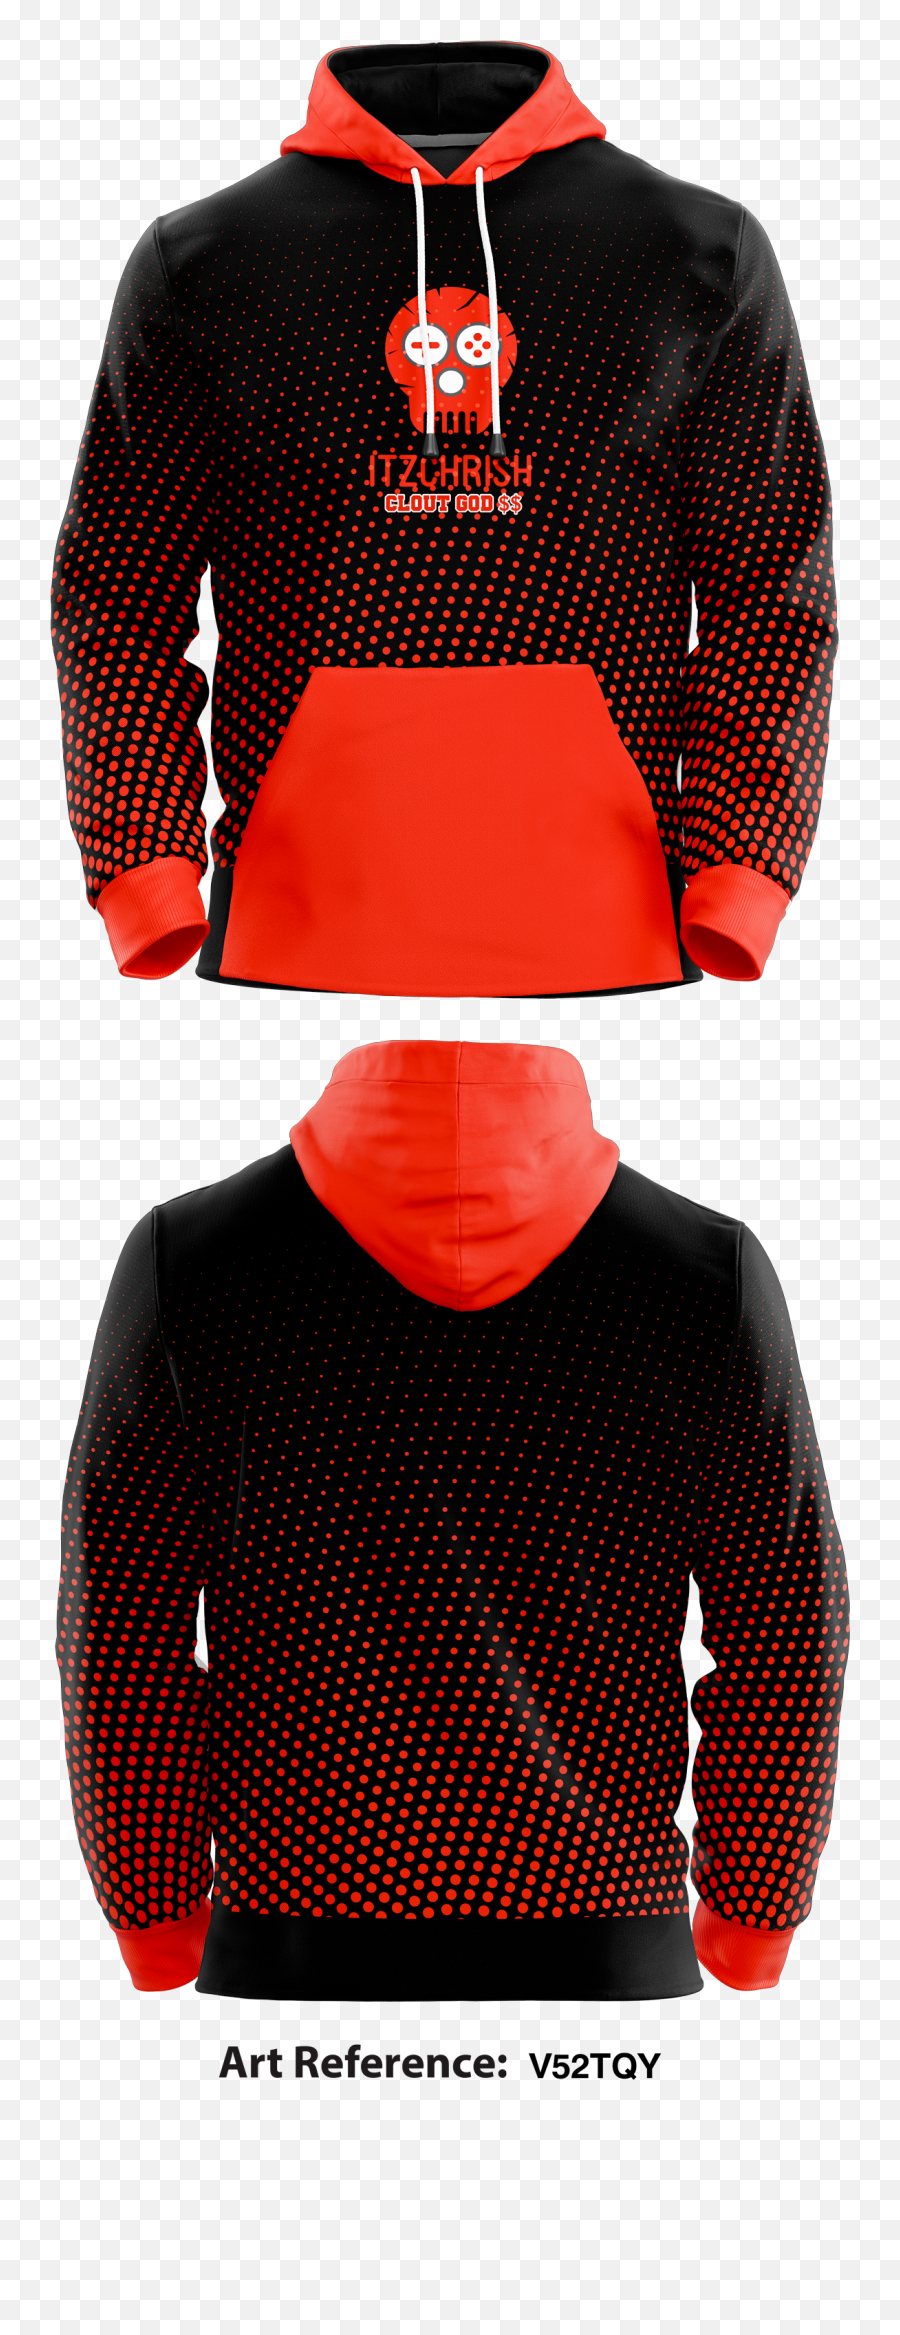 Clout God Hoodie - V52tqy Fictional Character Png,Clout Png